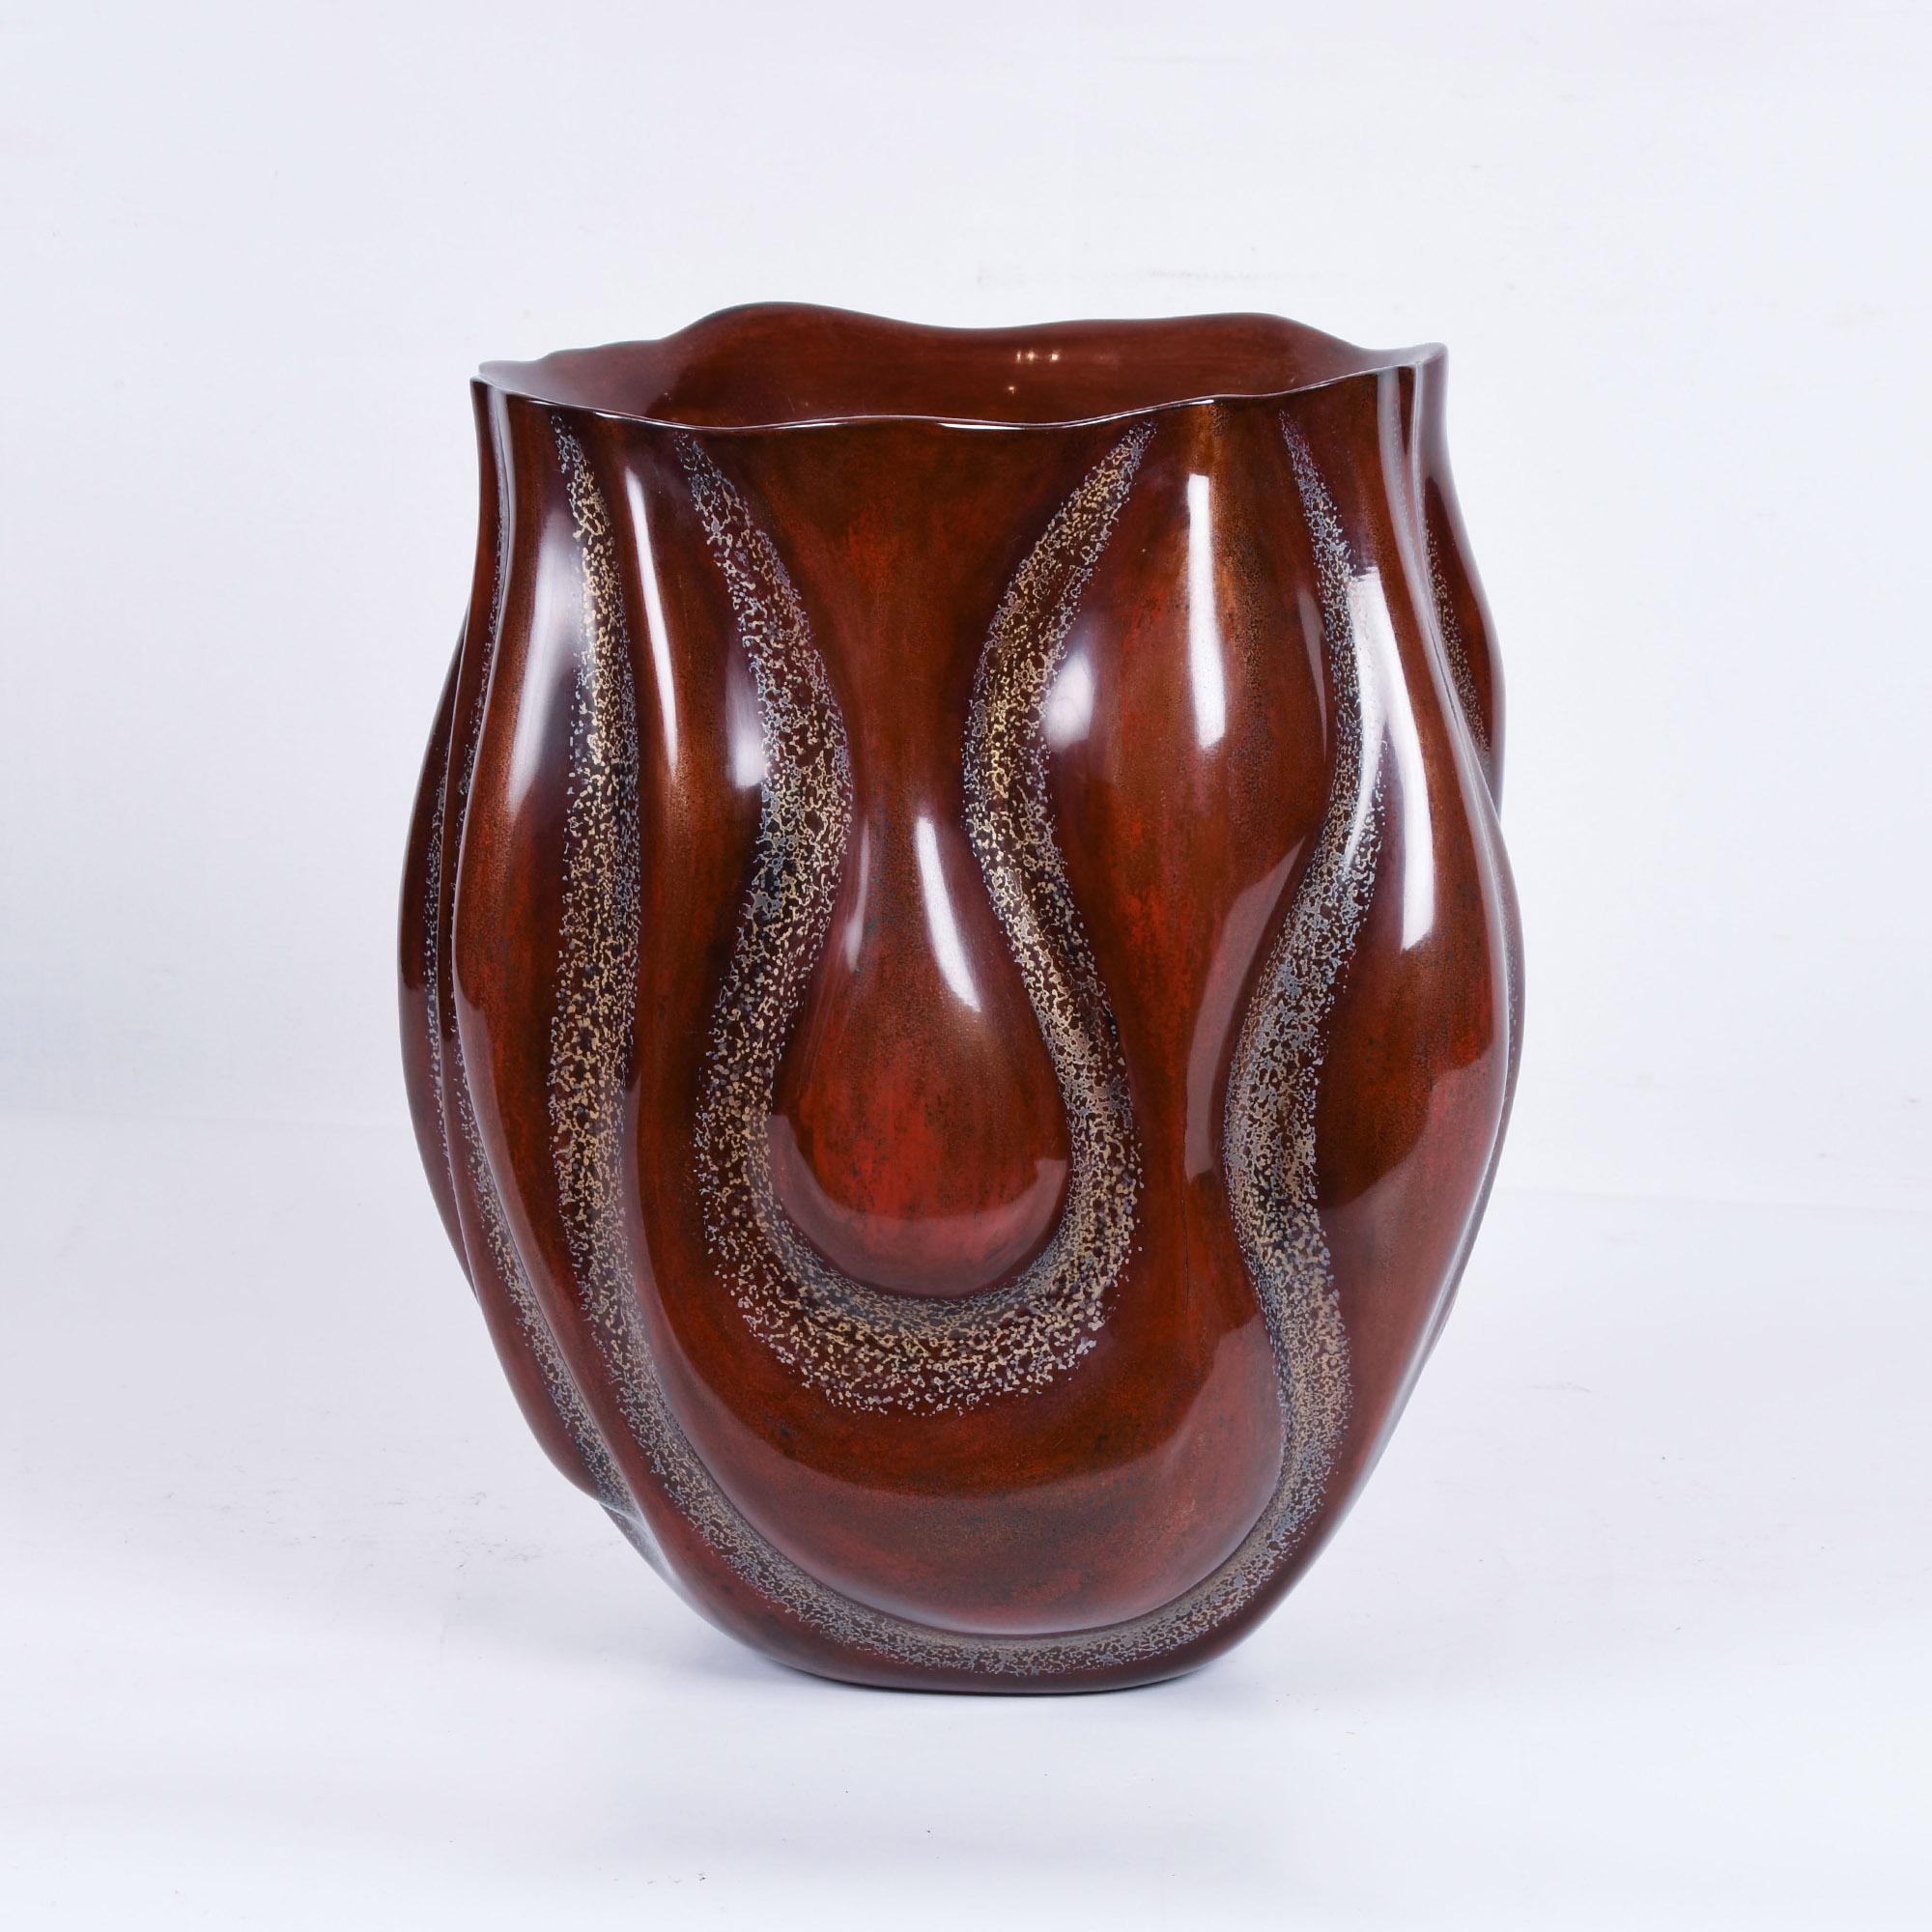 An exhibition quality dry lacquered ikebana flower vase by Masayo Koiwa. This highly unusual organically shaped vase has a sculptural feel, it sensual curves are hand-carved and lacquered with a masterful and highly decorative finish that makes this